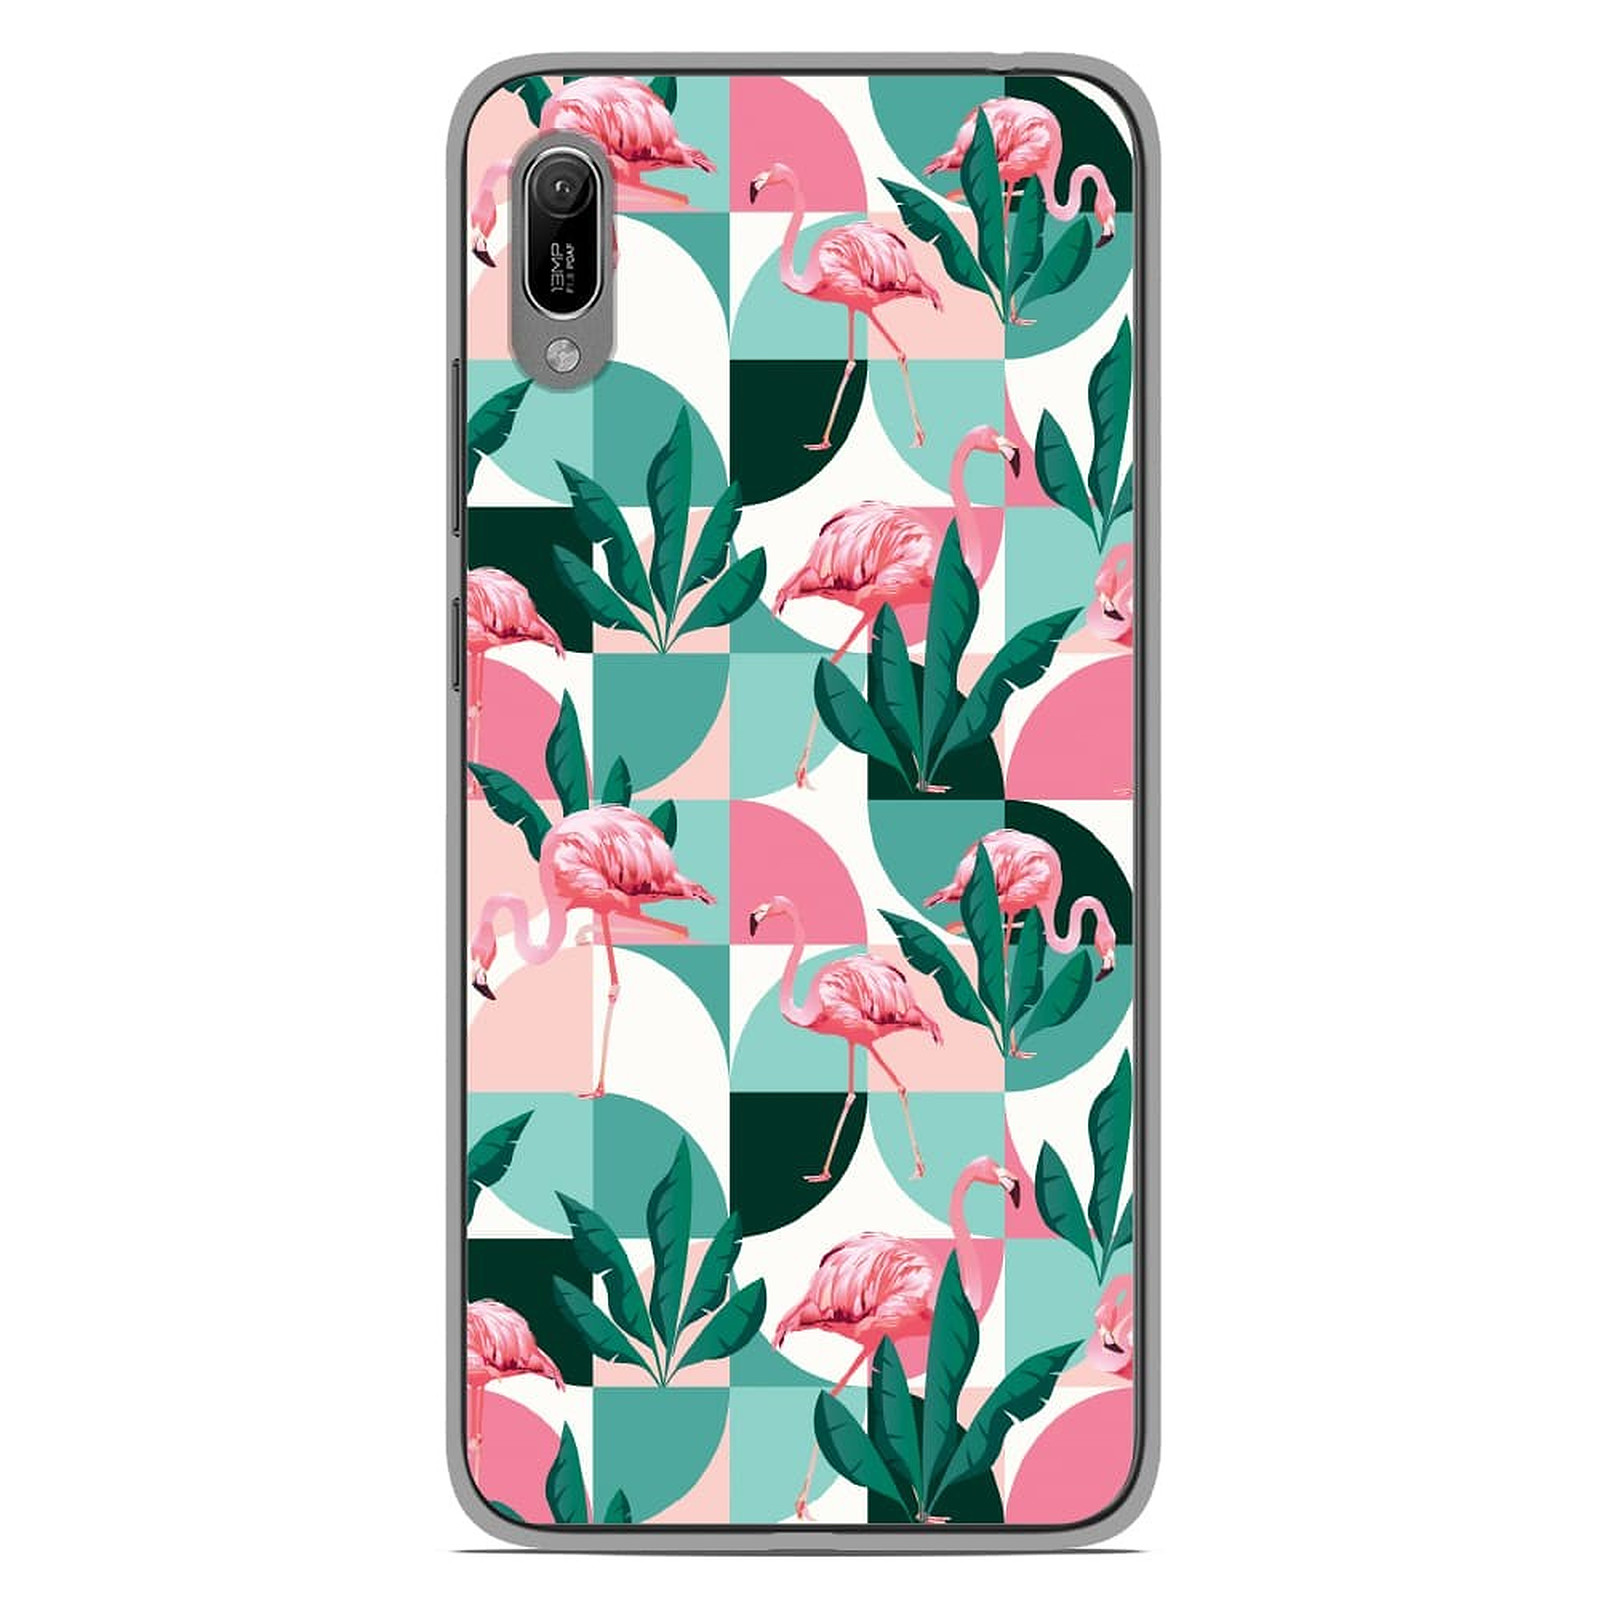 1001 Coques Coque silicone gel Huawei Y6 2019 motif Flamants Roses ge´ome´trique - Coque telephone 1001Coques